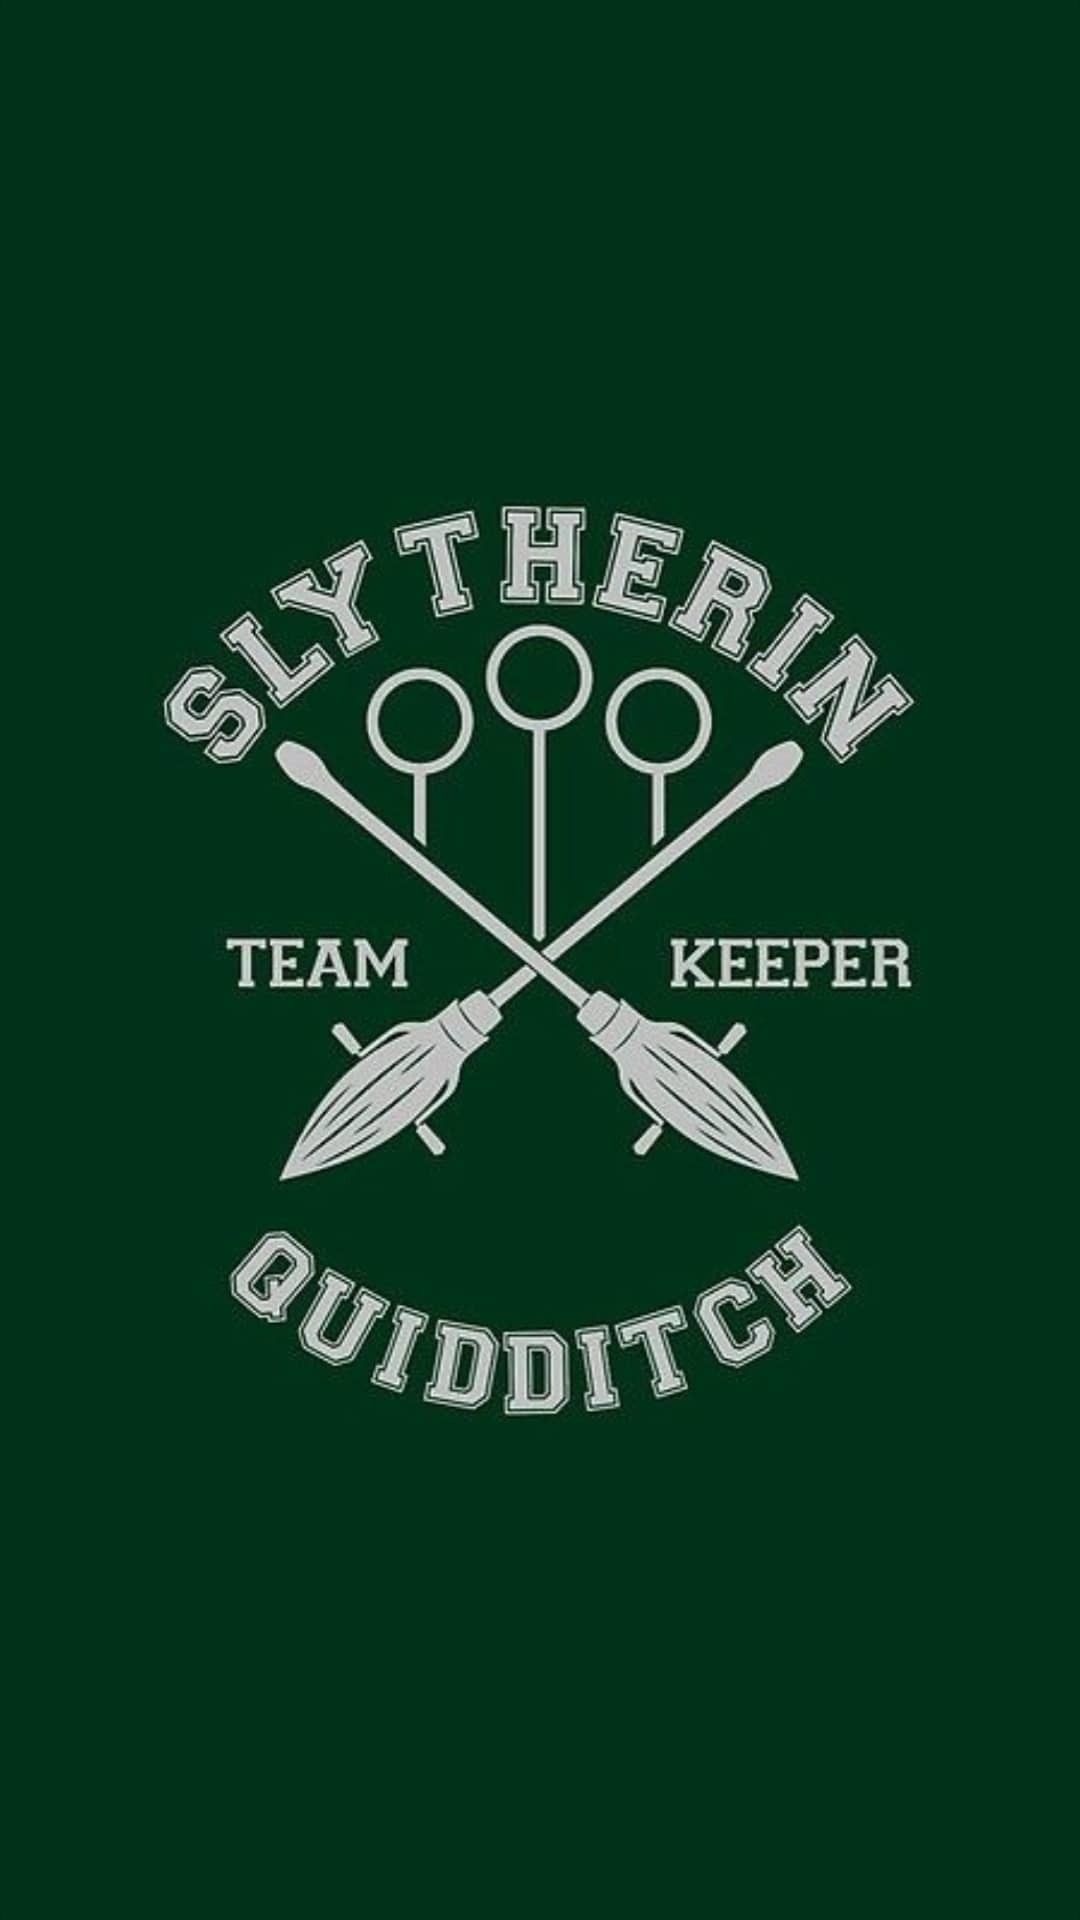 Harry potter slytherin quidditch captain